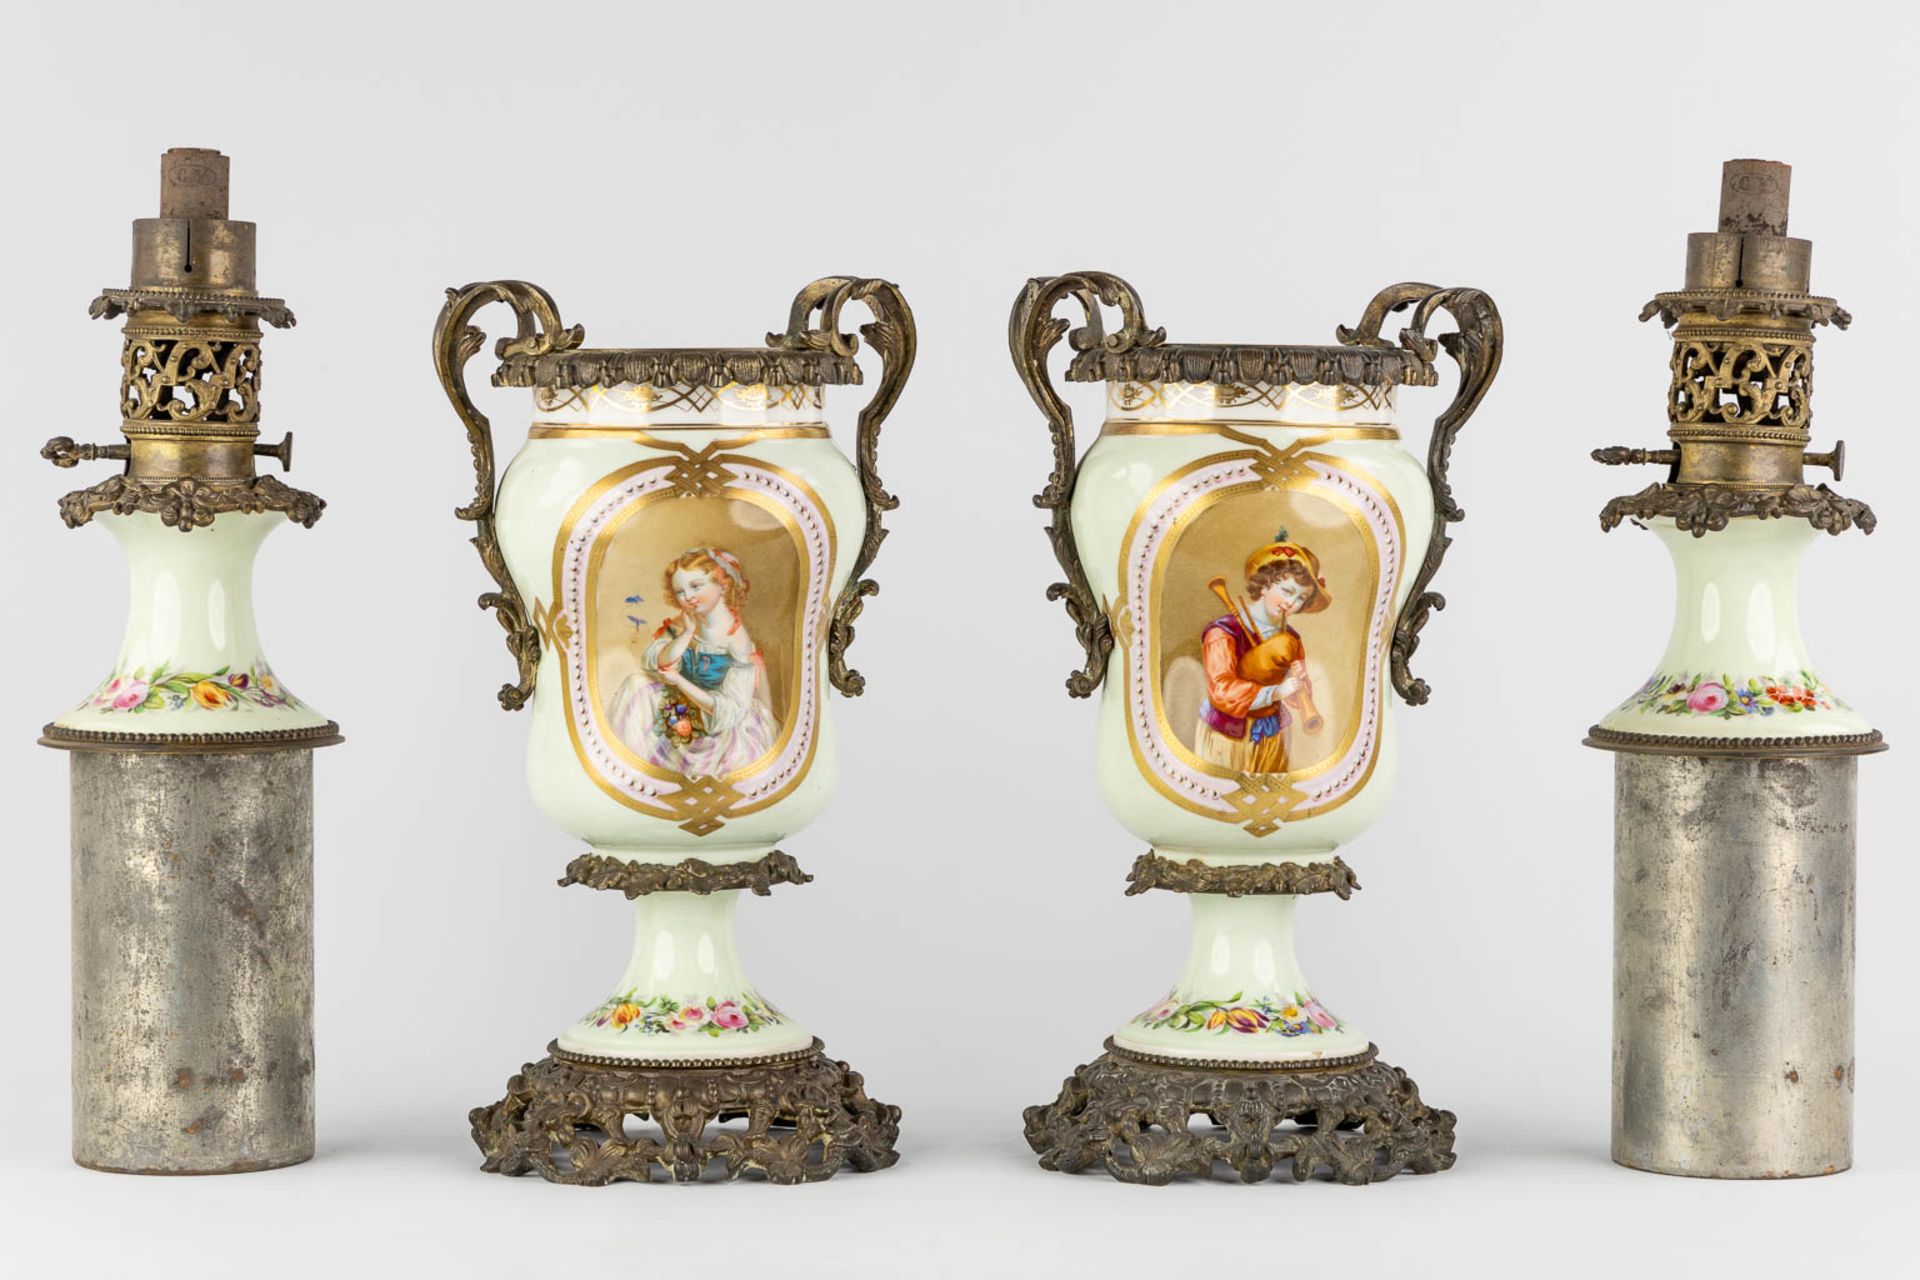 A pair of oil lamps with hand-painted decors, mounted with bronze. 19th C. (L:18 x W:20 x H:57 cm) - Bild 6 aus 18